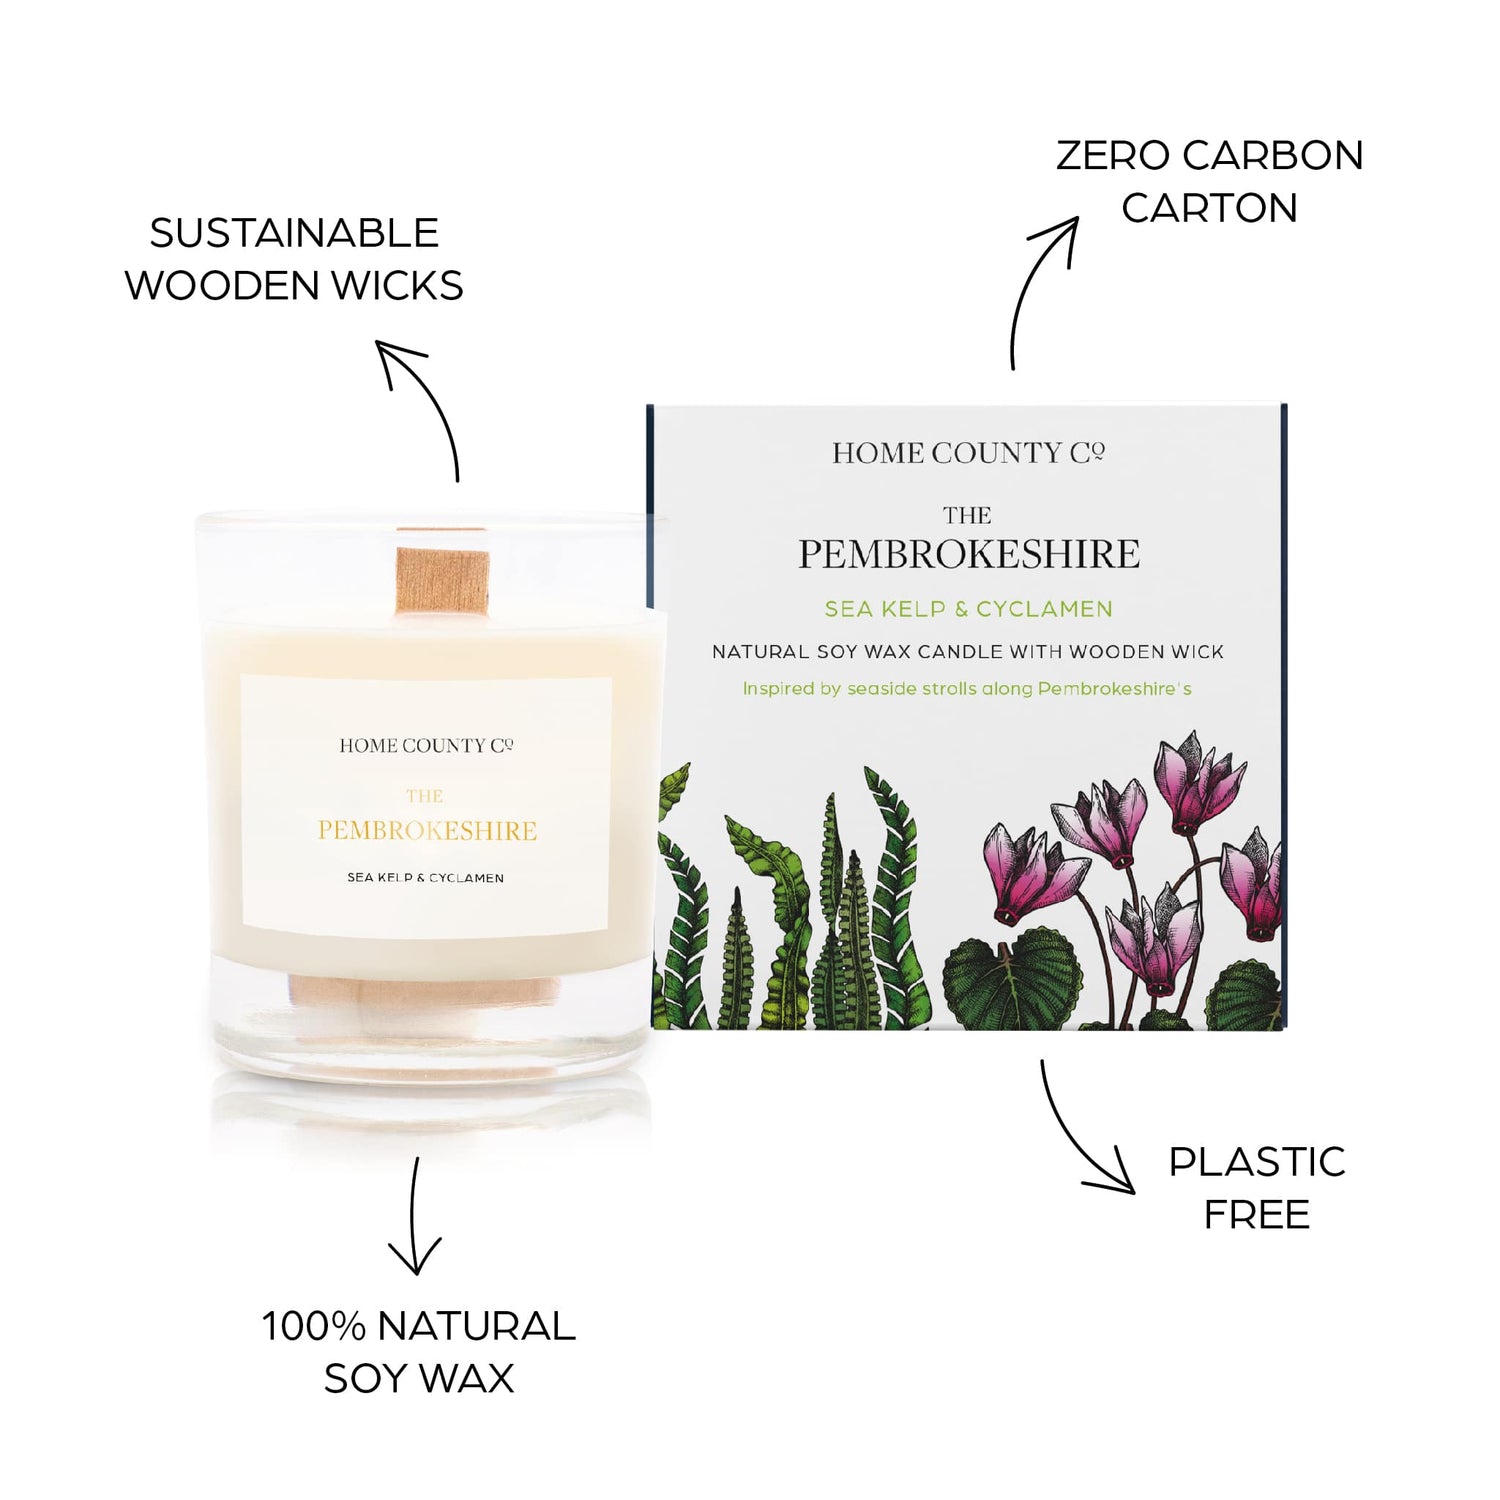 Sustainable candle credentials are shown around the coastal scented candle image - sustainable wooden wicks, zero carbon carton, 100% natural soy wax, plastic free